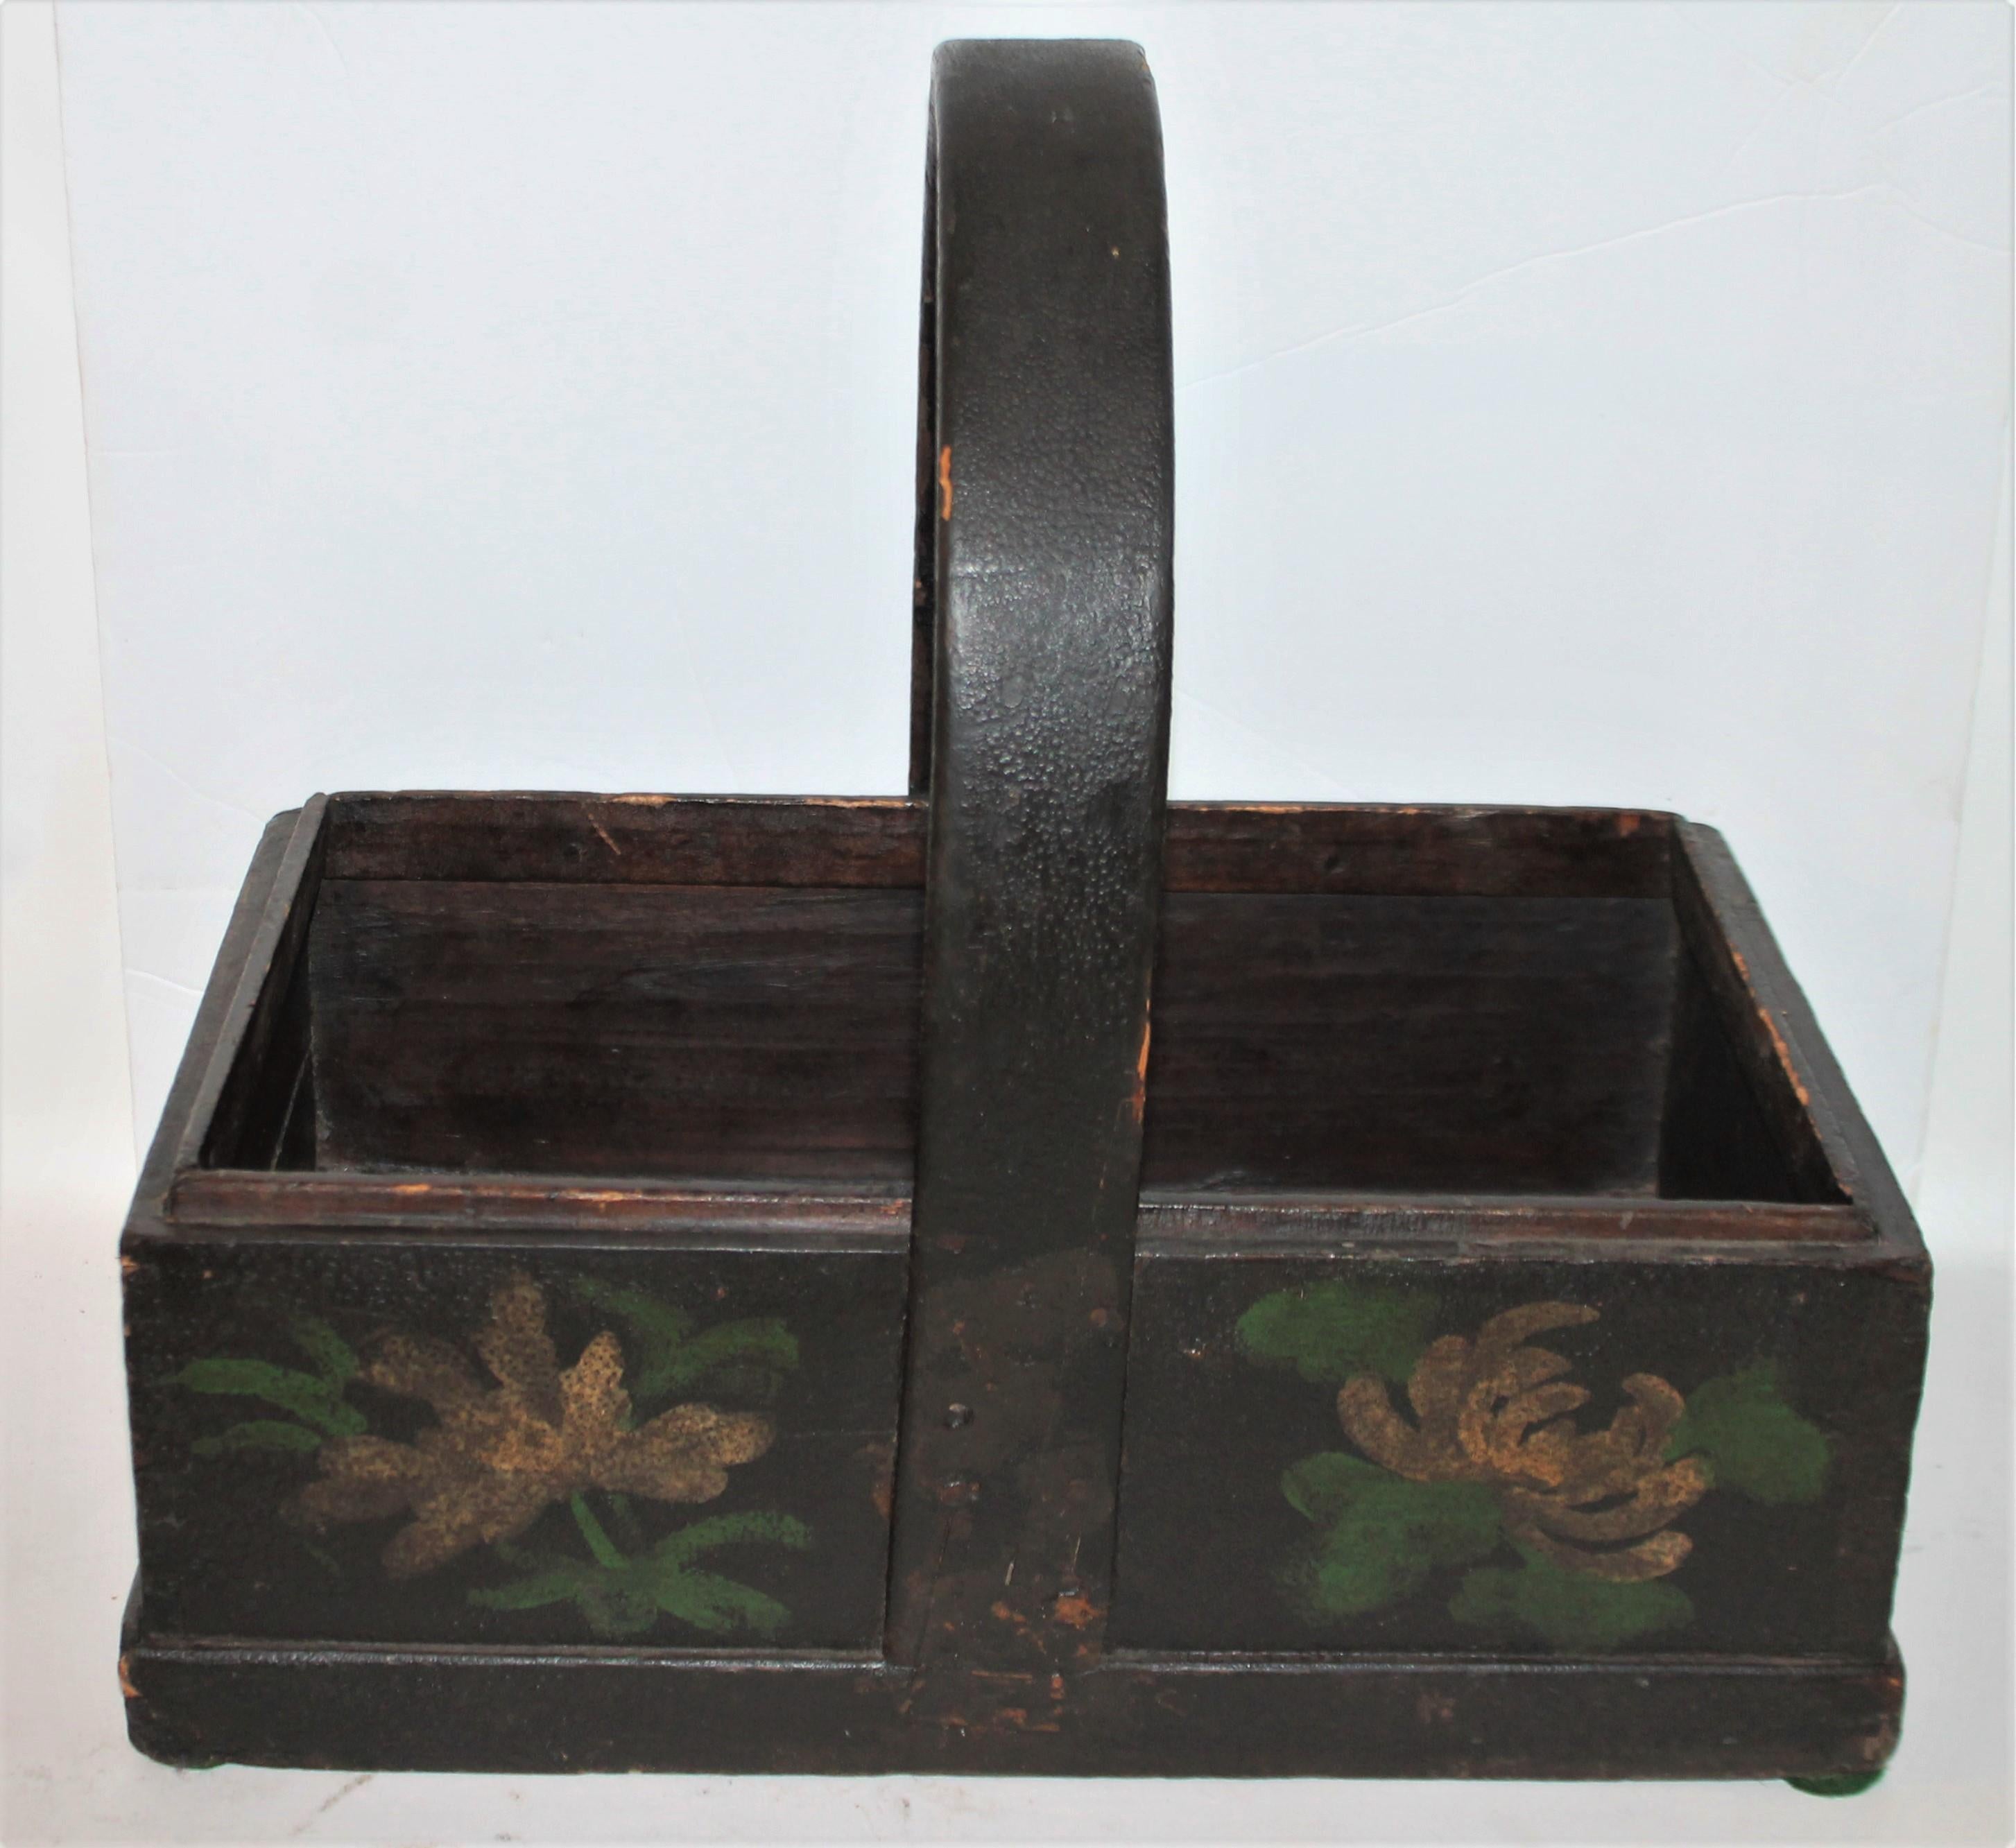 19th century handmade apple basket with original black and floral paint with original handle.